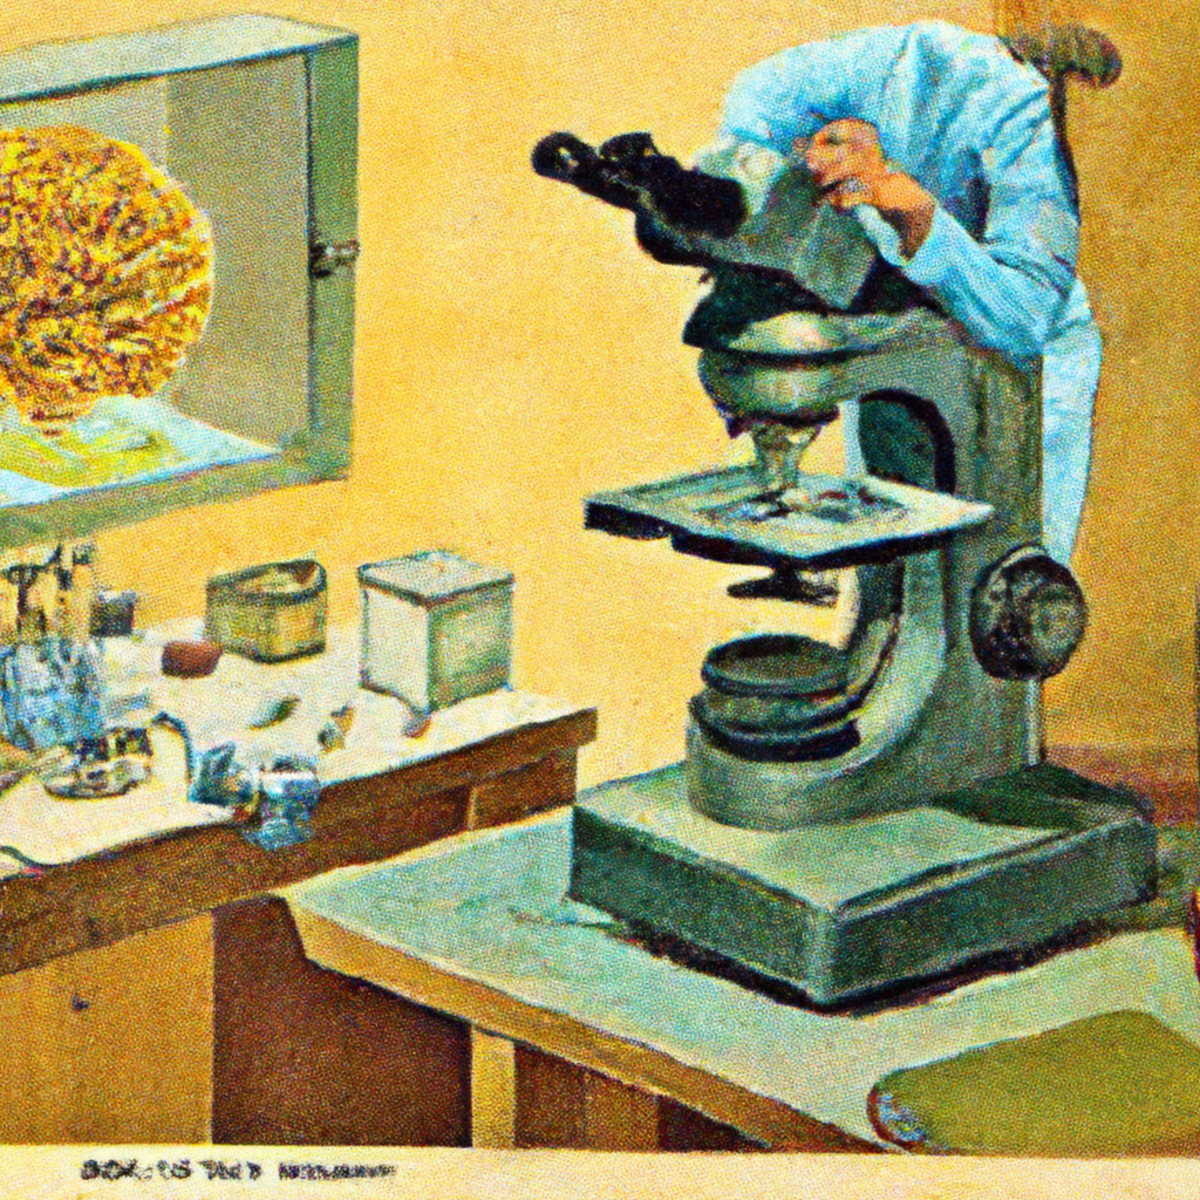 Microscope focused on neural tissue samples in a lab, highlighting the importance of scientific research on Kuru.